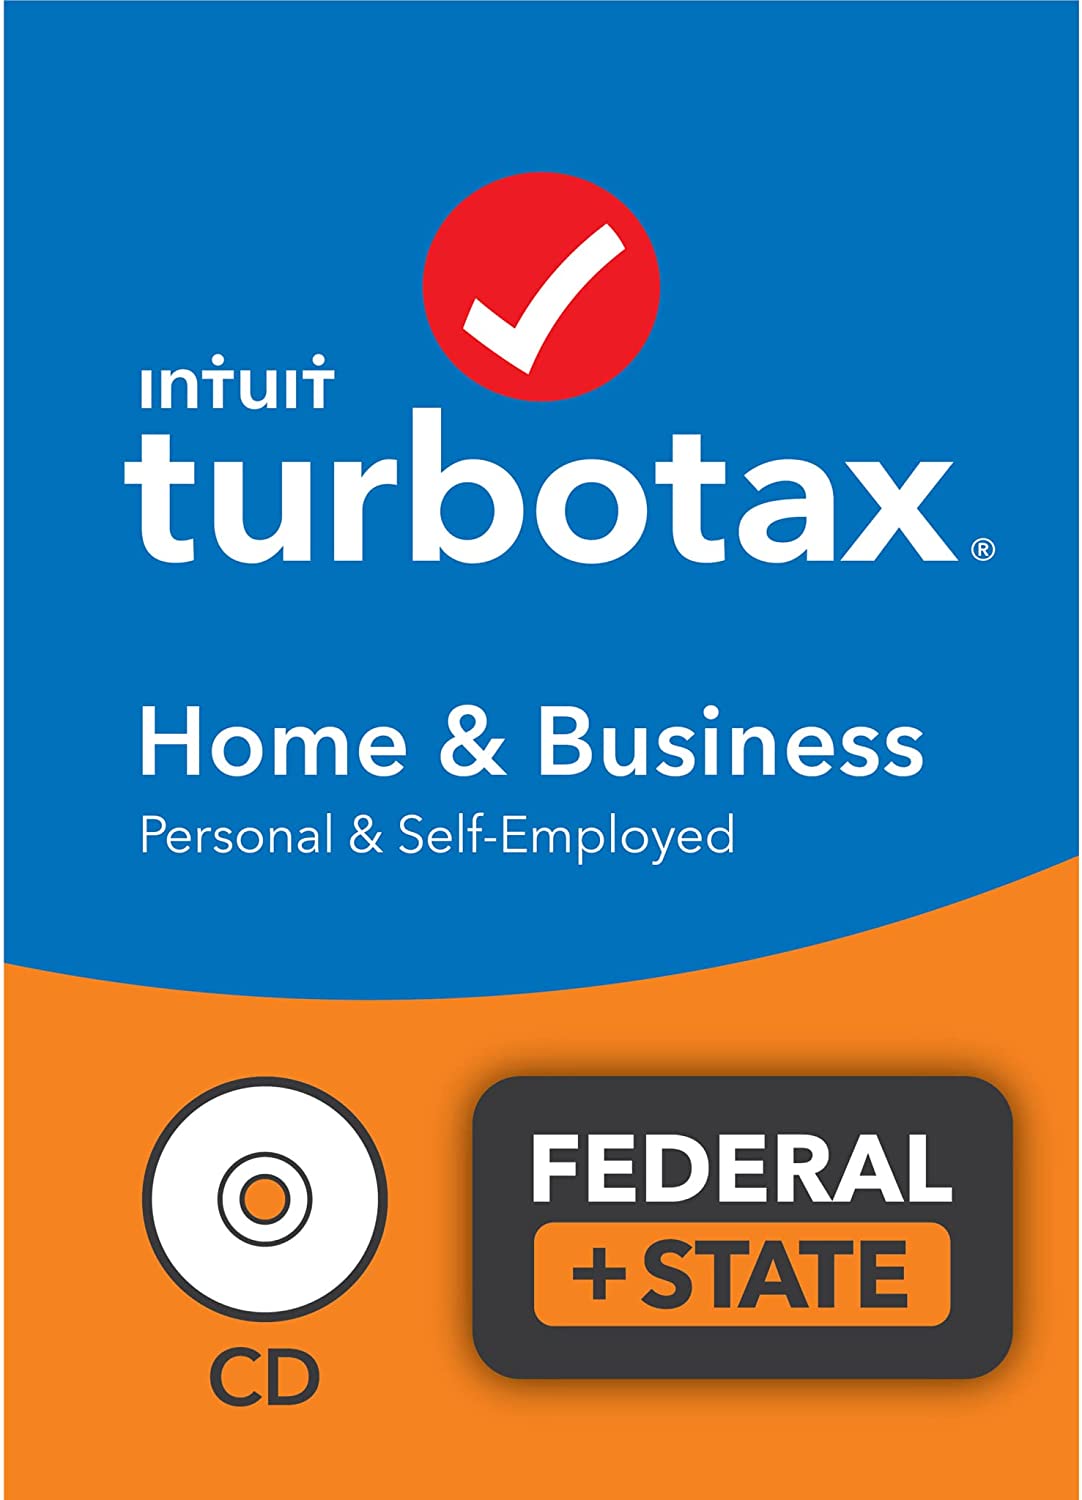 TurboTax Home & Business 2021 $64.99 on amazon, CD or download, federal plus state at Amazon